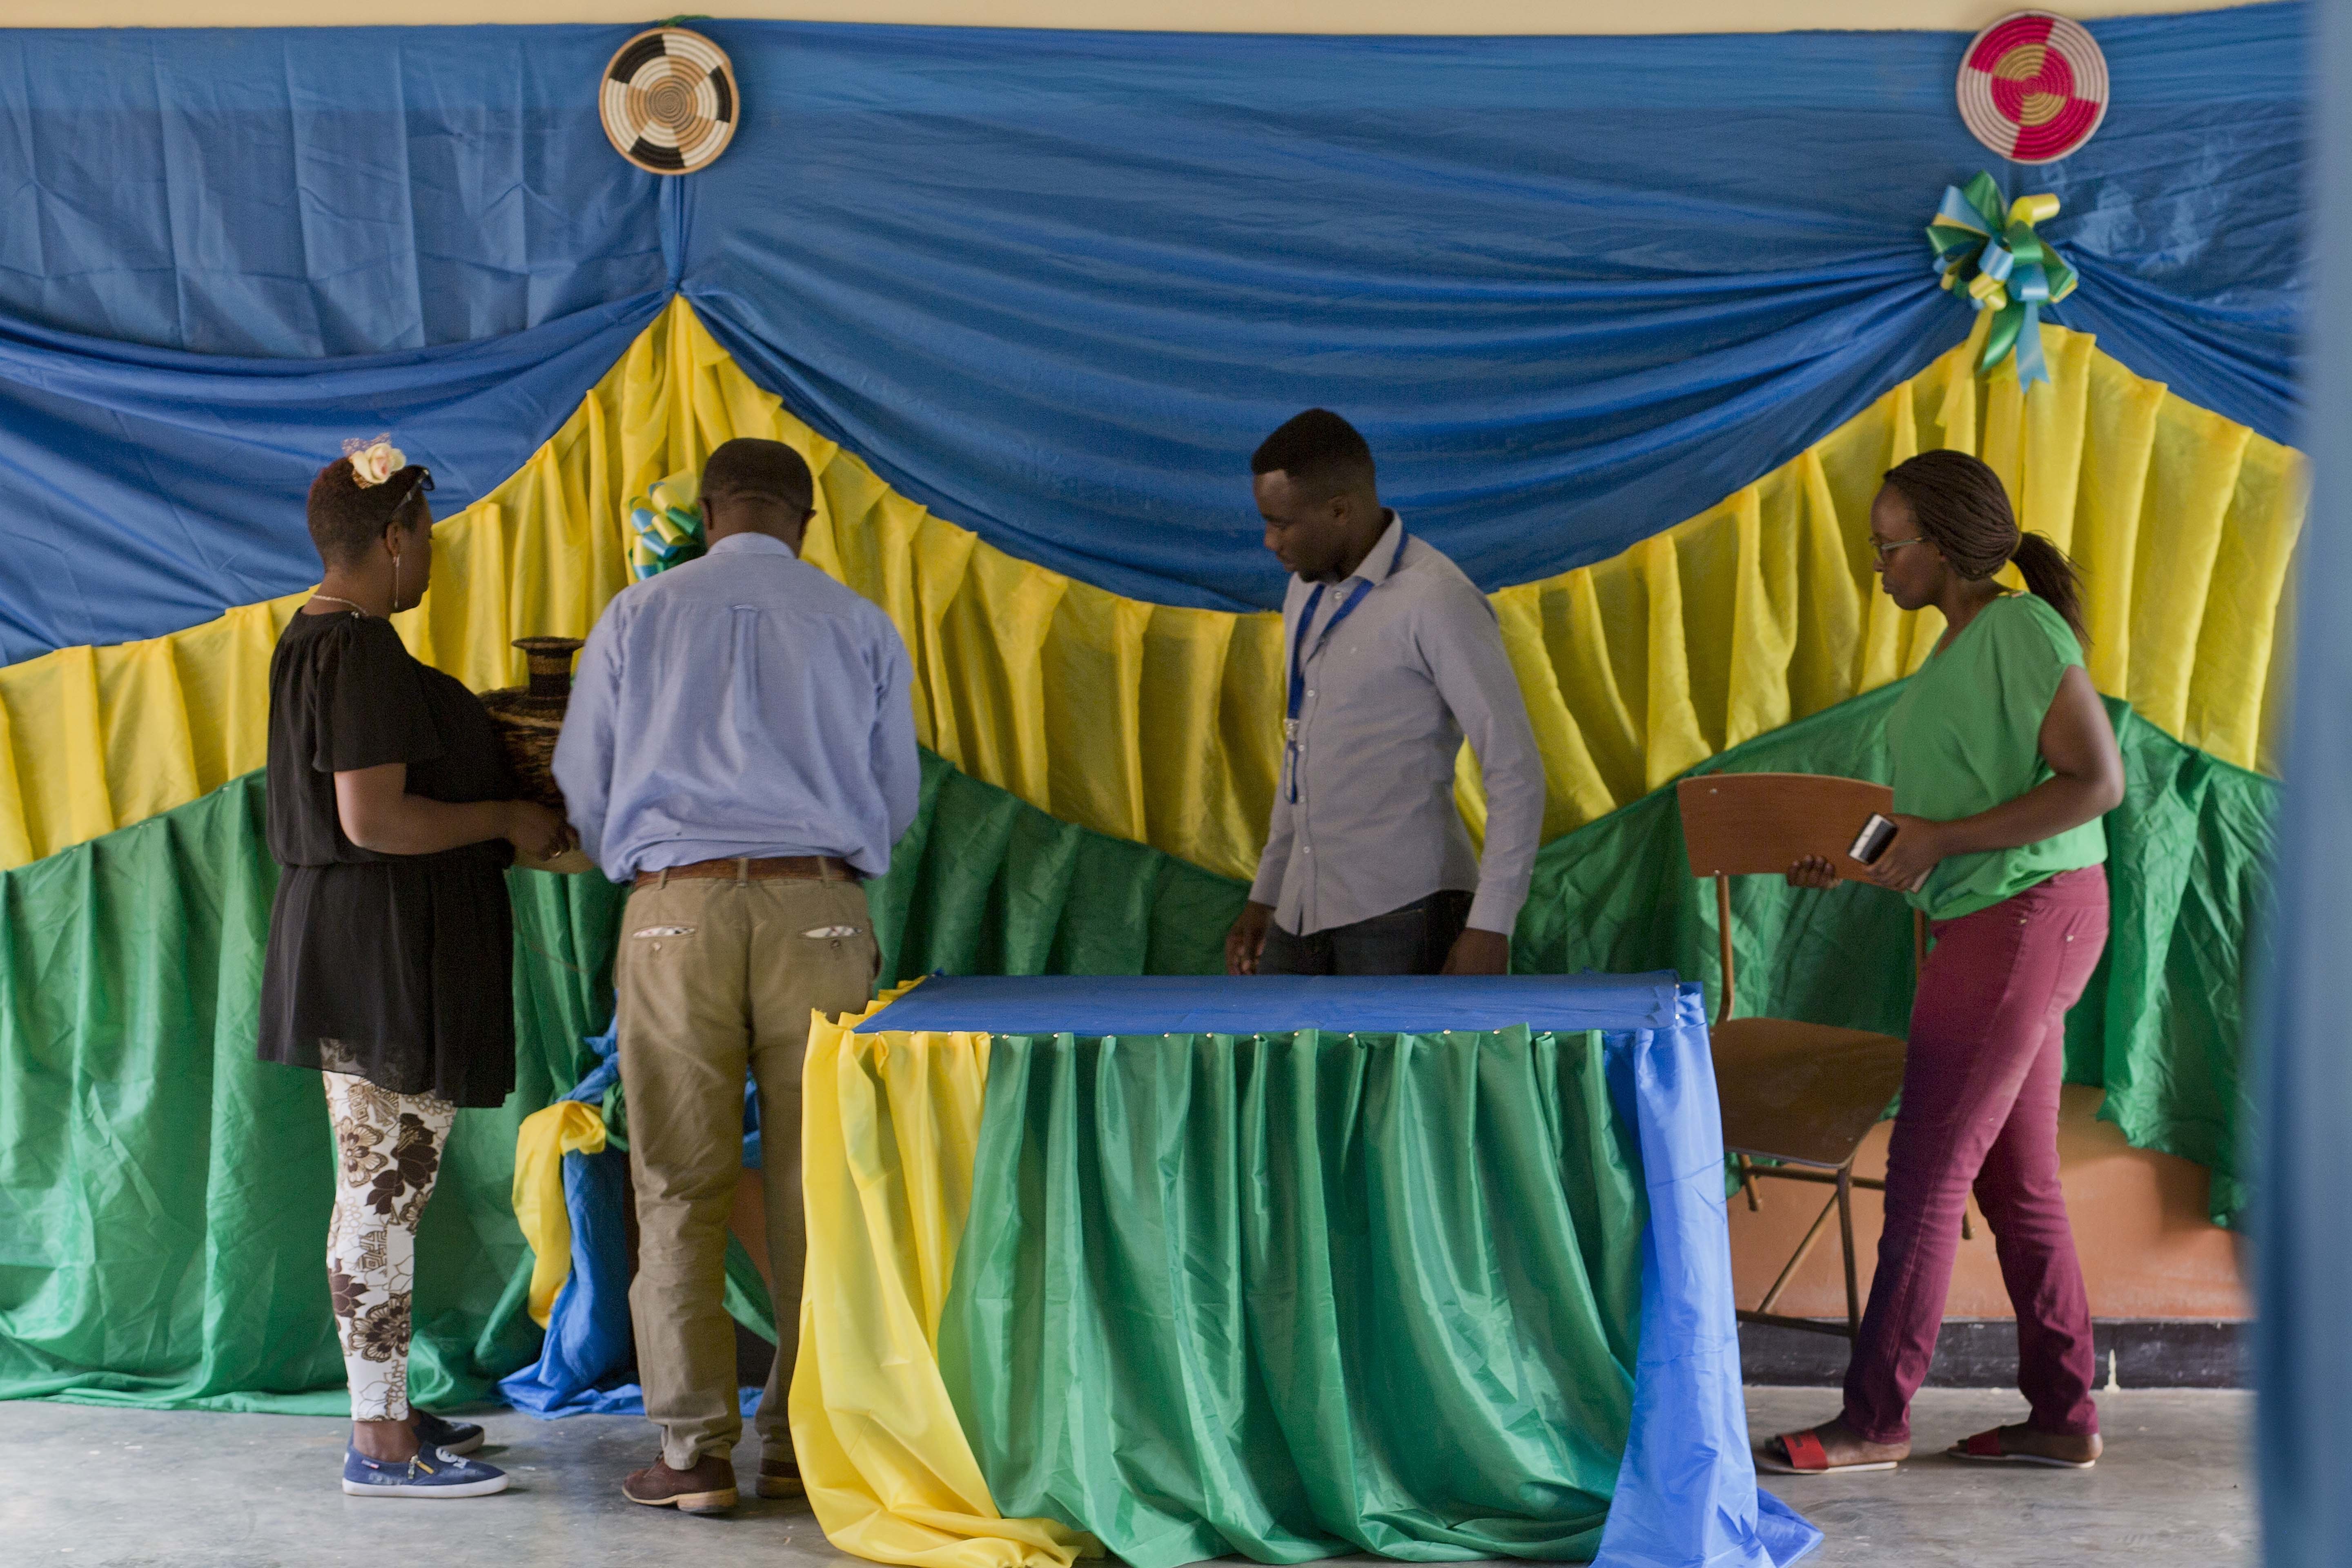 Election volunteers decorate a polling station in Rwanda's capital Kigali Thursday Aug. 3, 2017, in preparation for the presidential election on Friday in which outgoing president Paul Kagame is widely expected to win another term after the government earlier disqualified all but three candidates. (AP Photo/Jerome Delay)